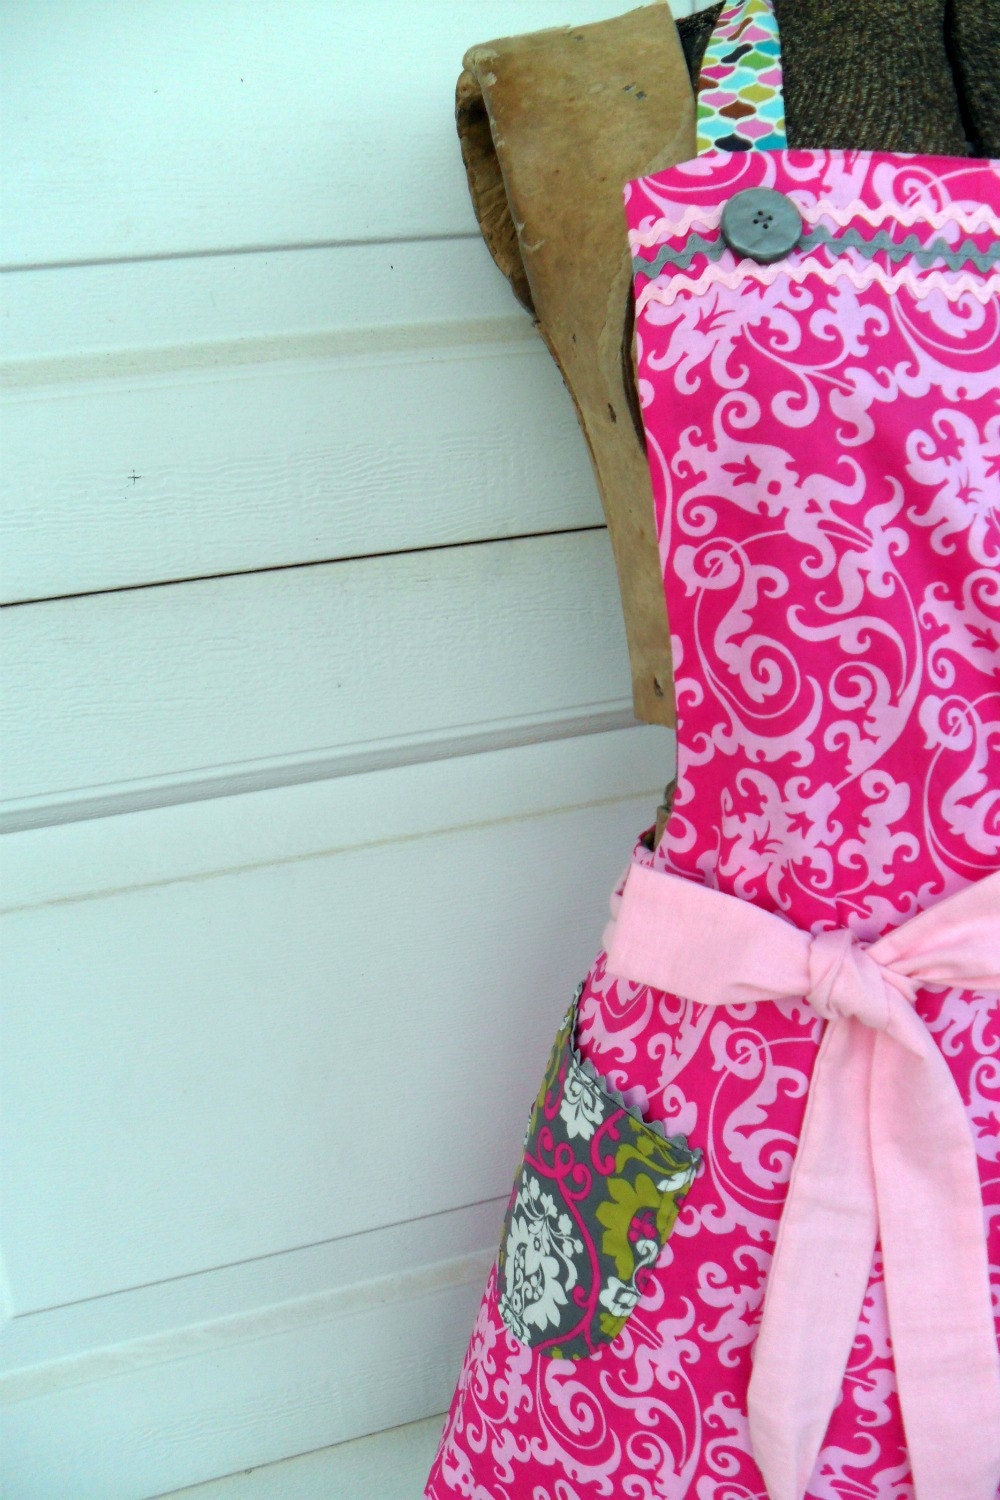 Flirty Reversible Apron in Hot Pink,Green and Gray for Women